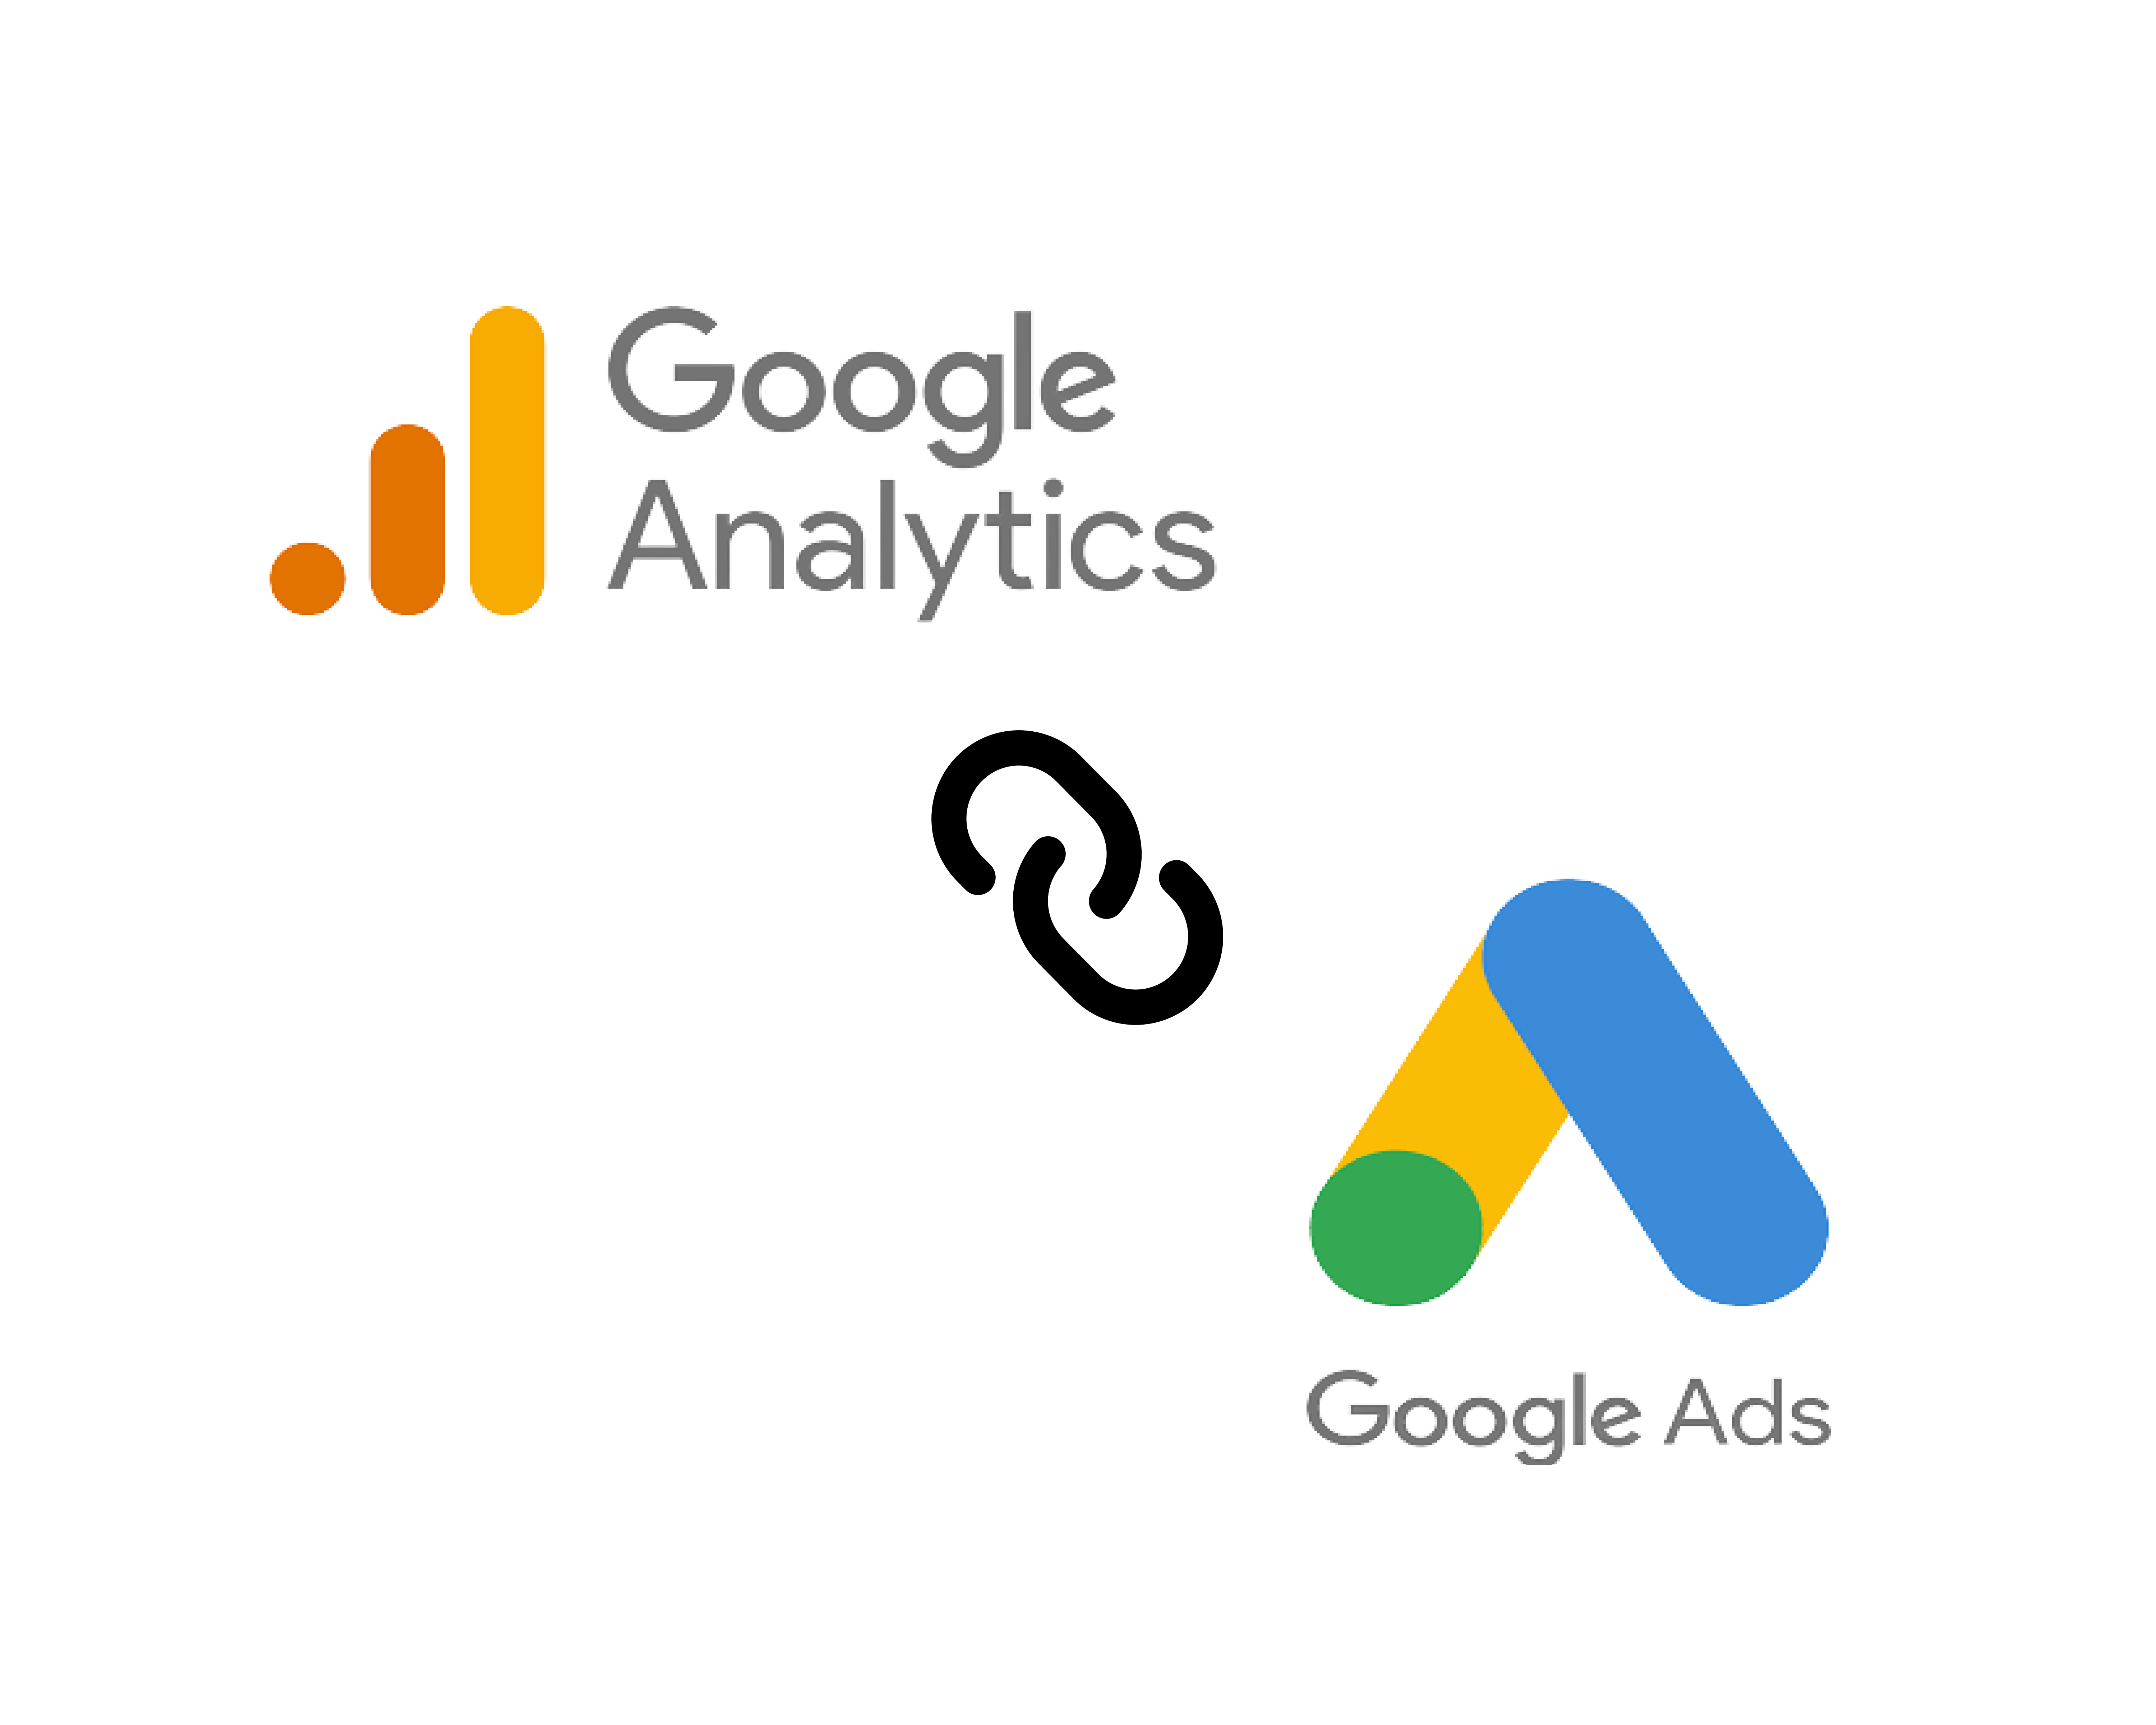 Connect your Google Analytics to Google Ads